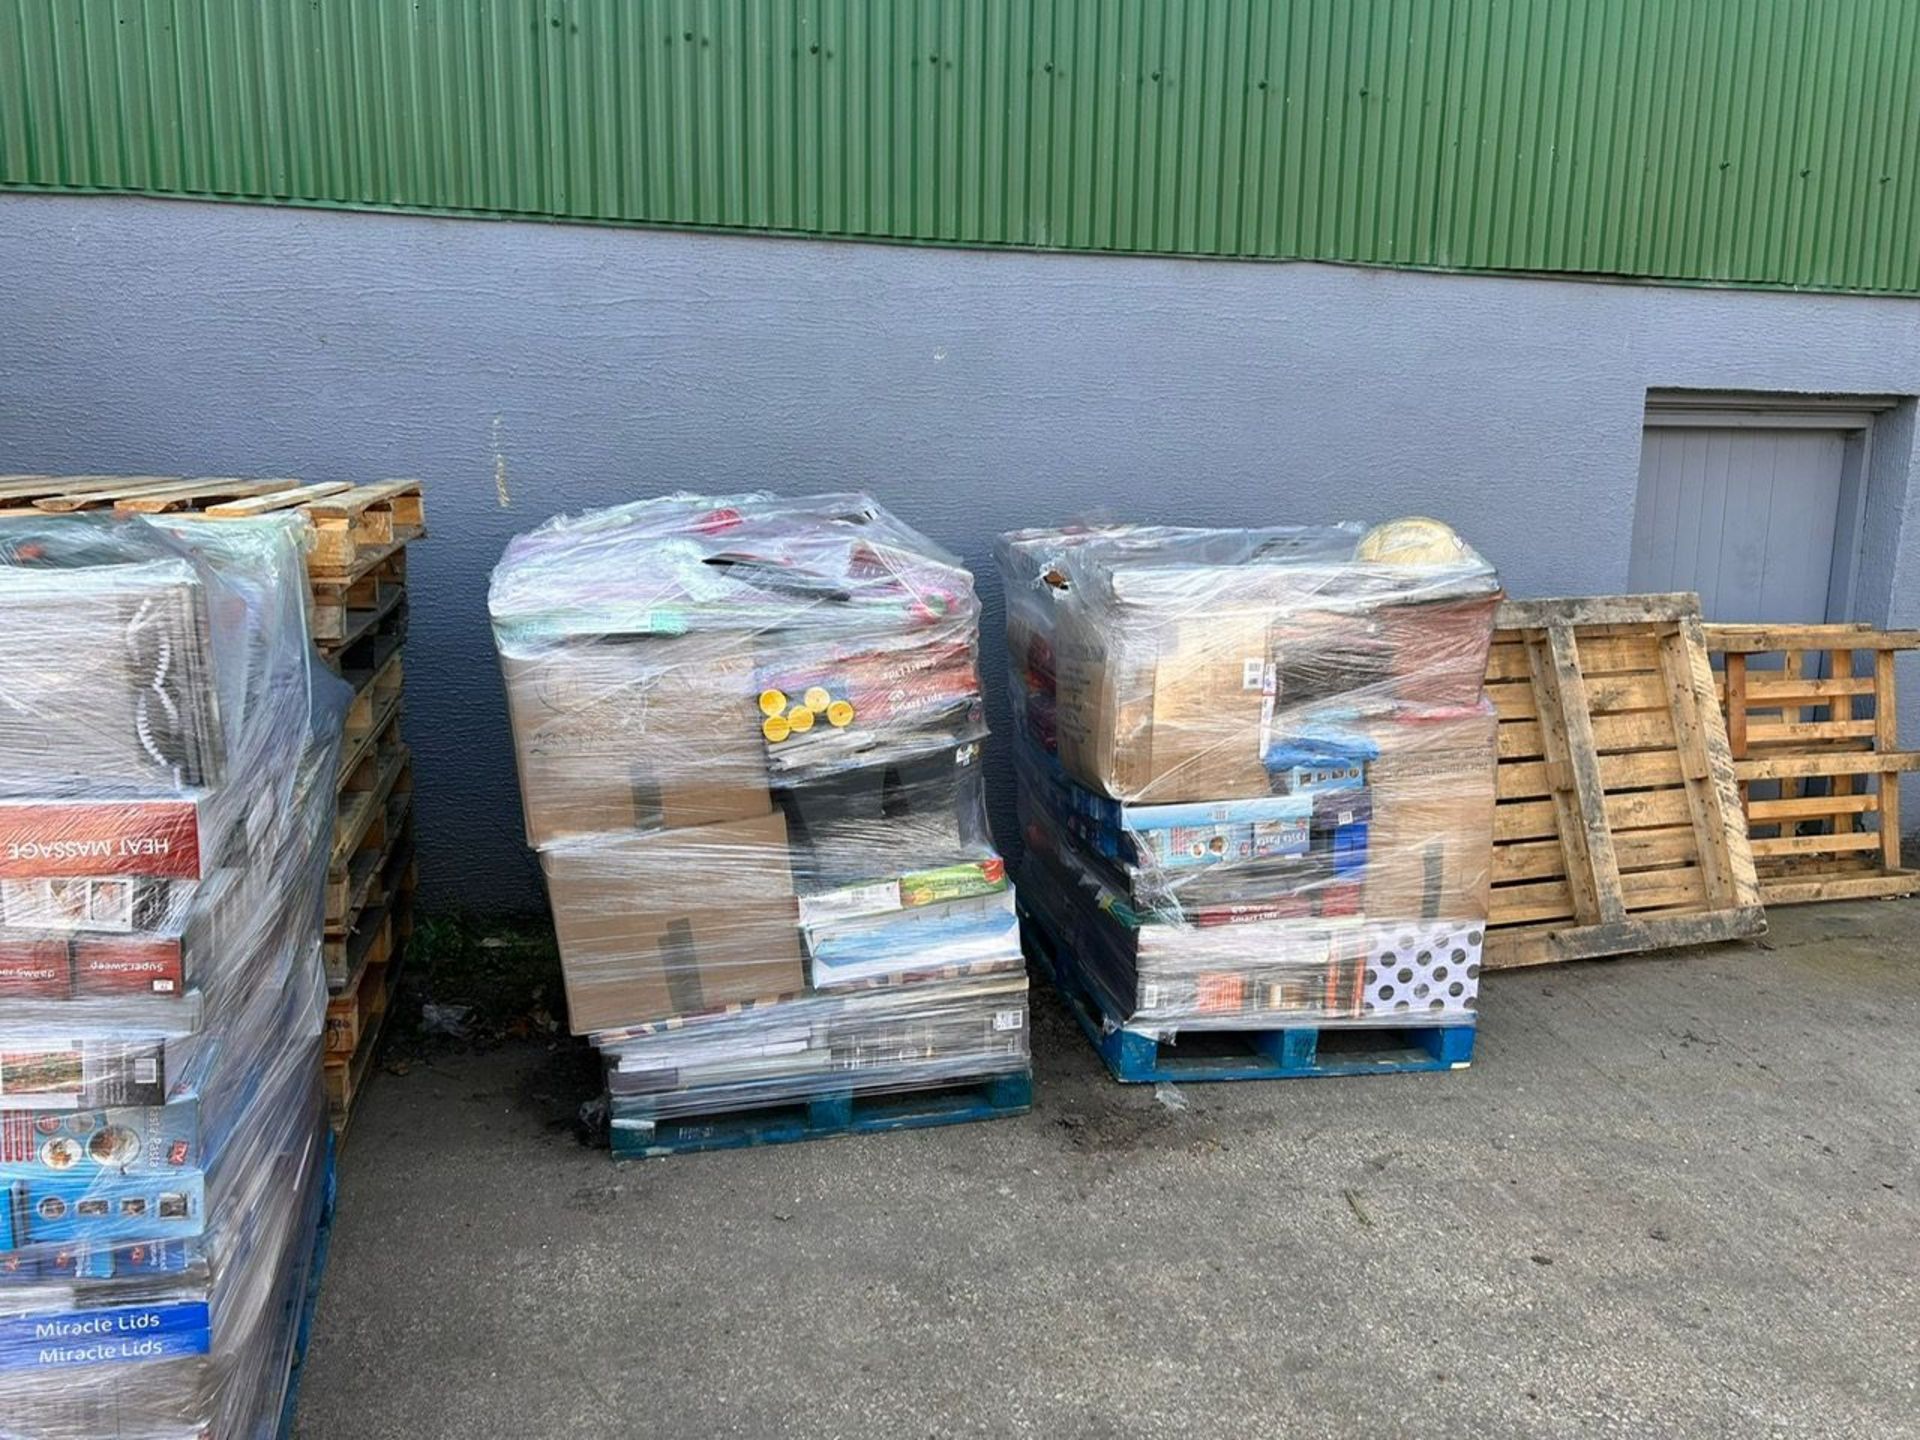 Large Pallet of Unchecked Supermarket Stock. Huge variety of items which may include: tools, toys, - Image 16 of 18